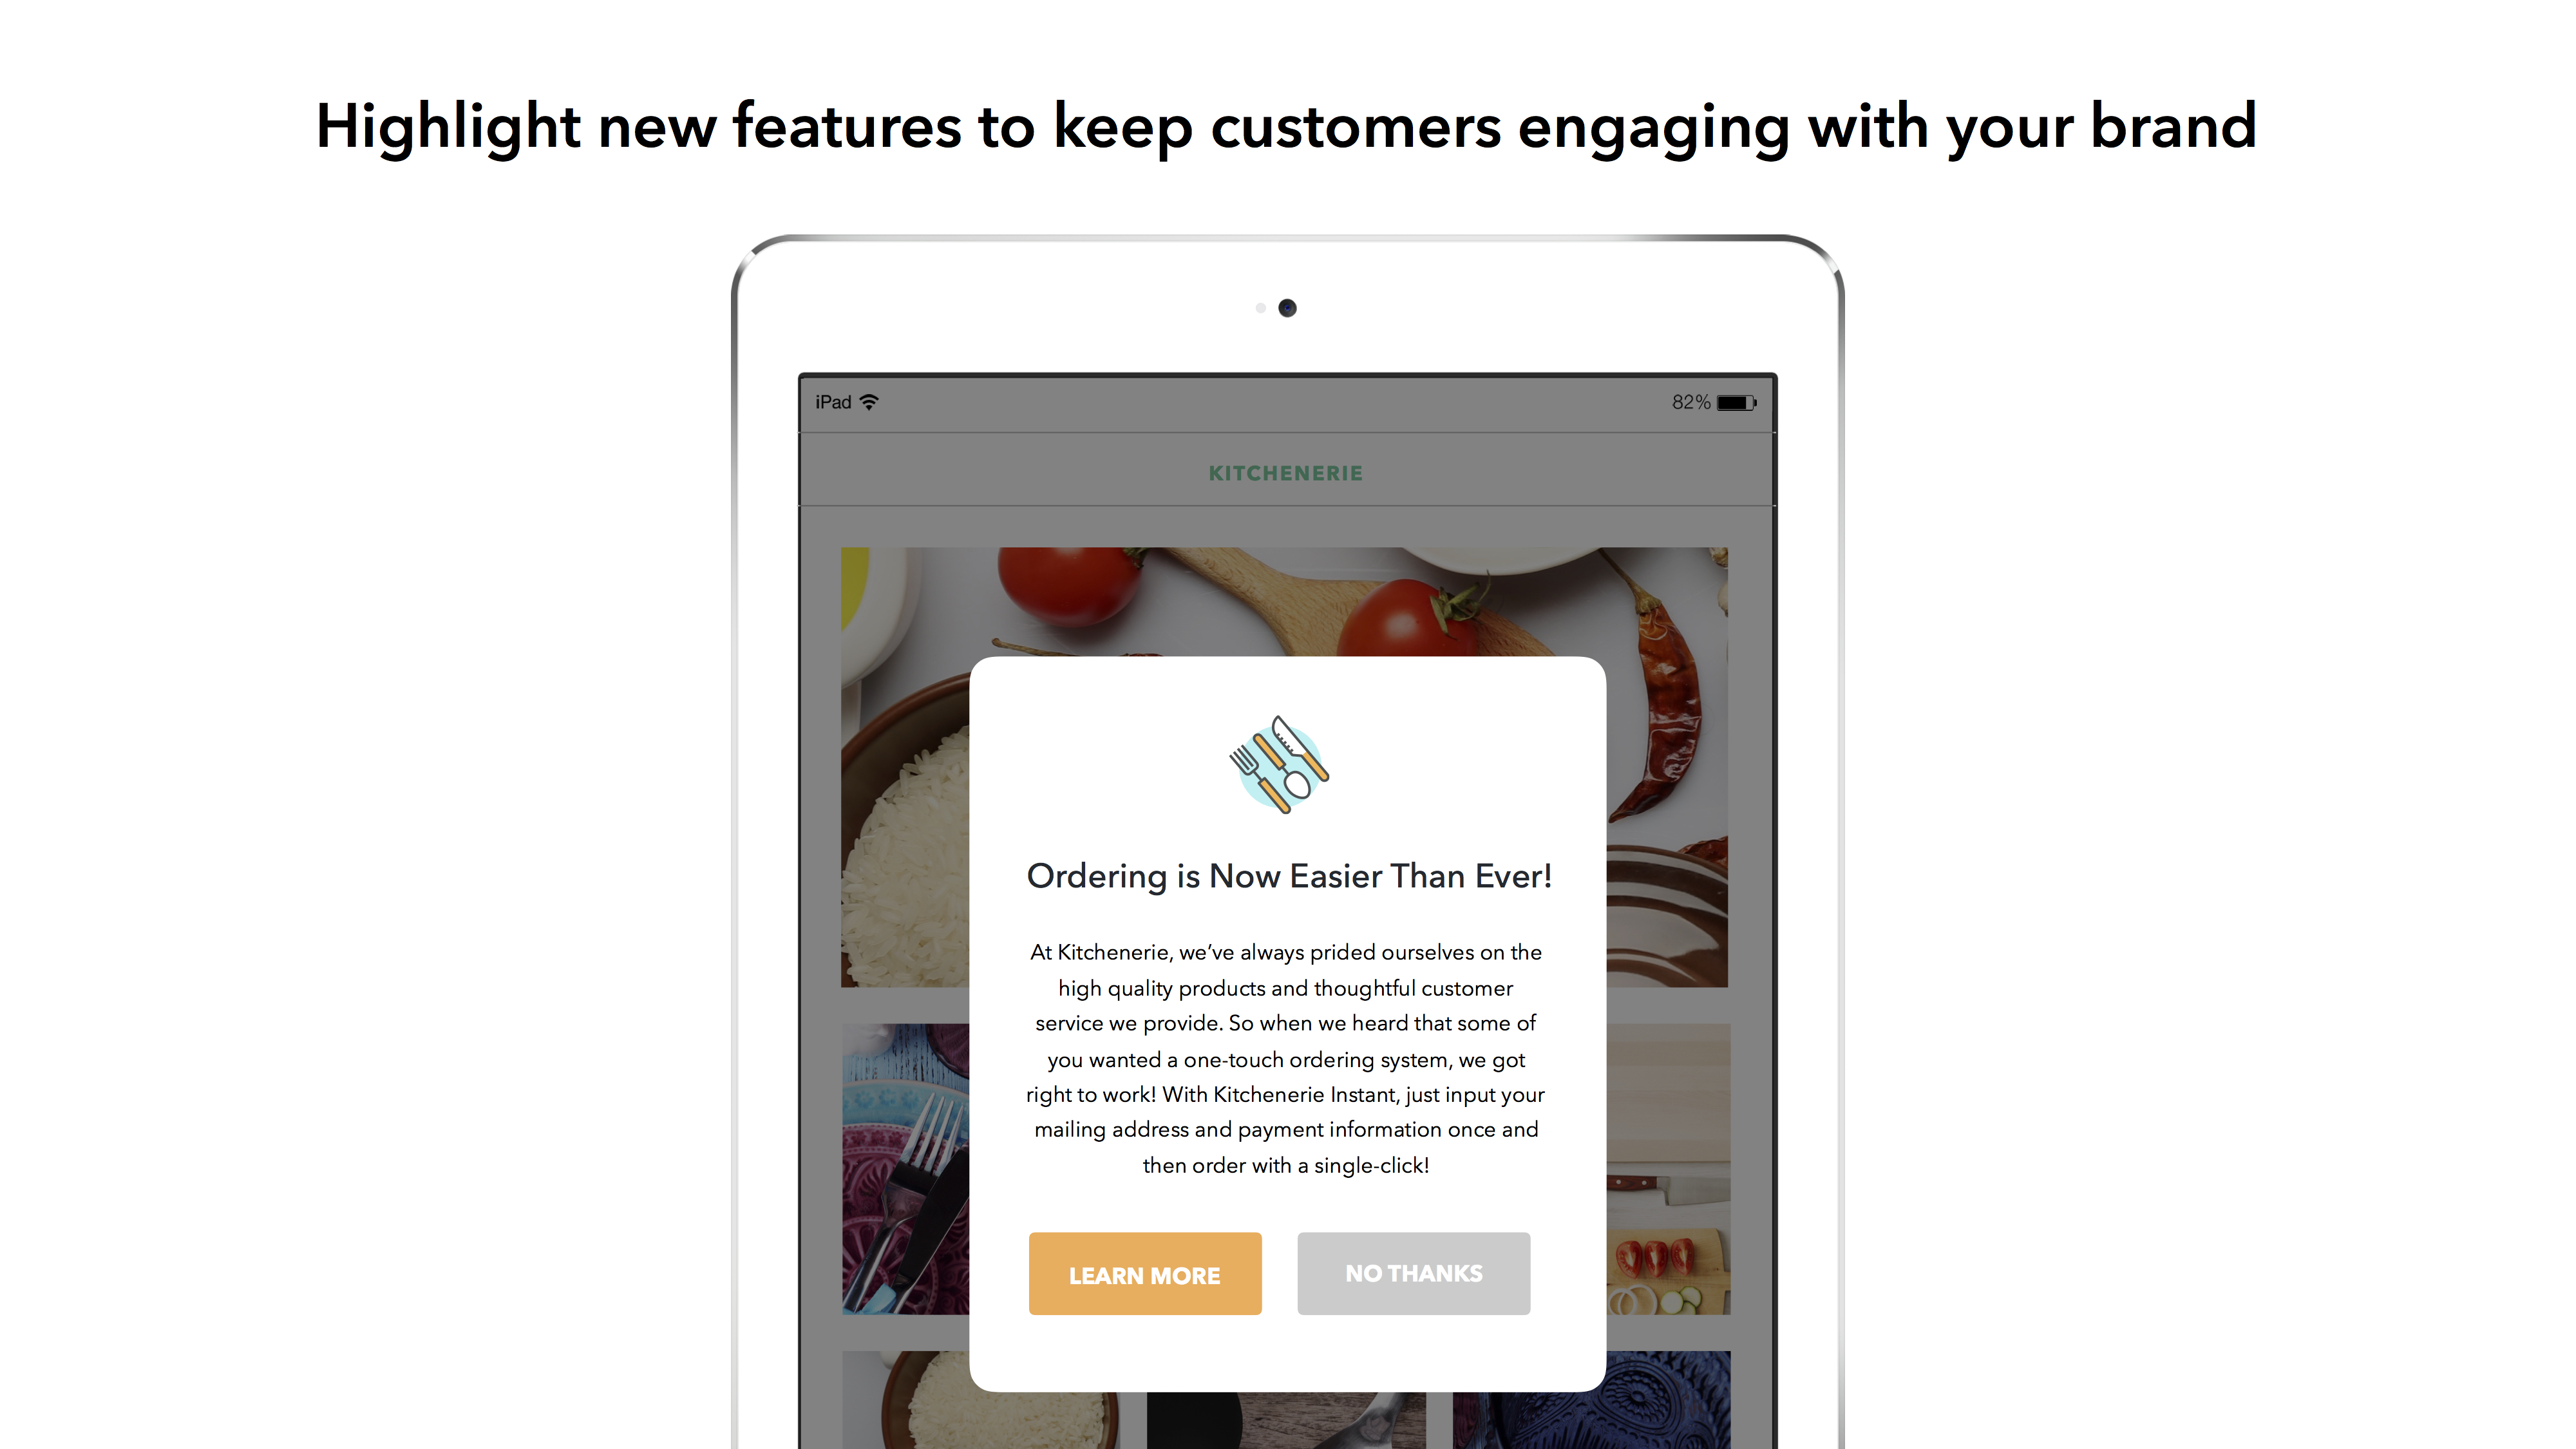 Highlight new features to keep customers involved